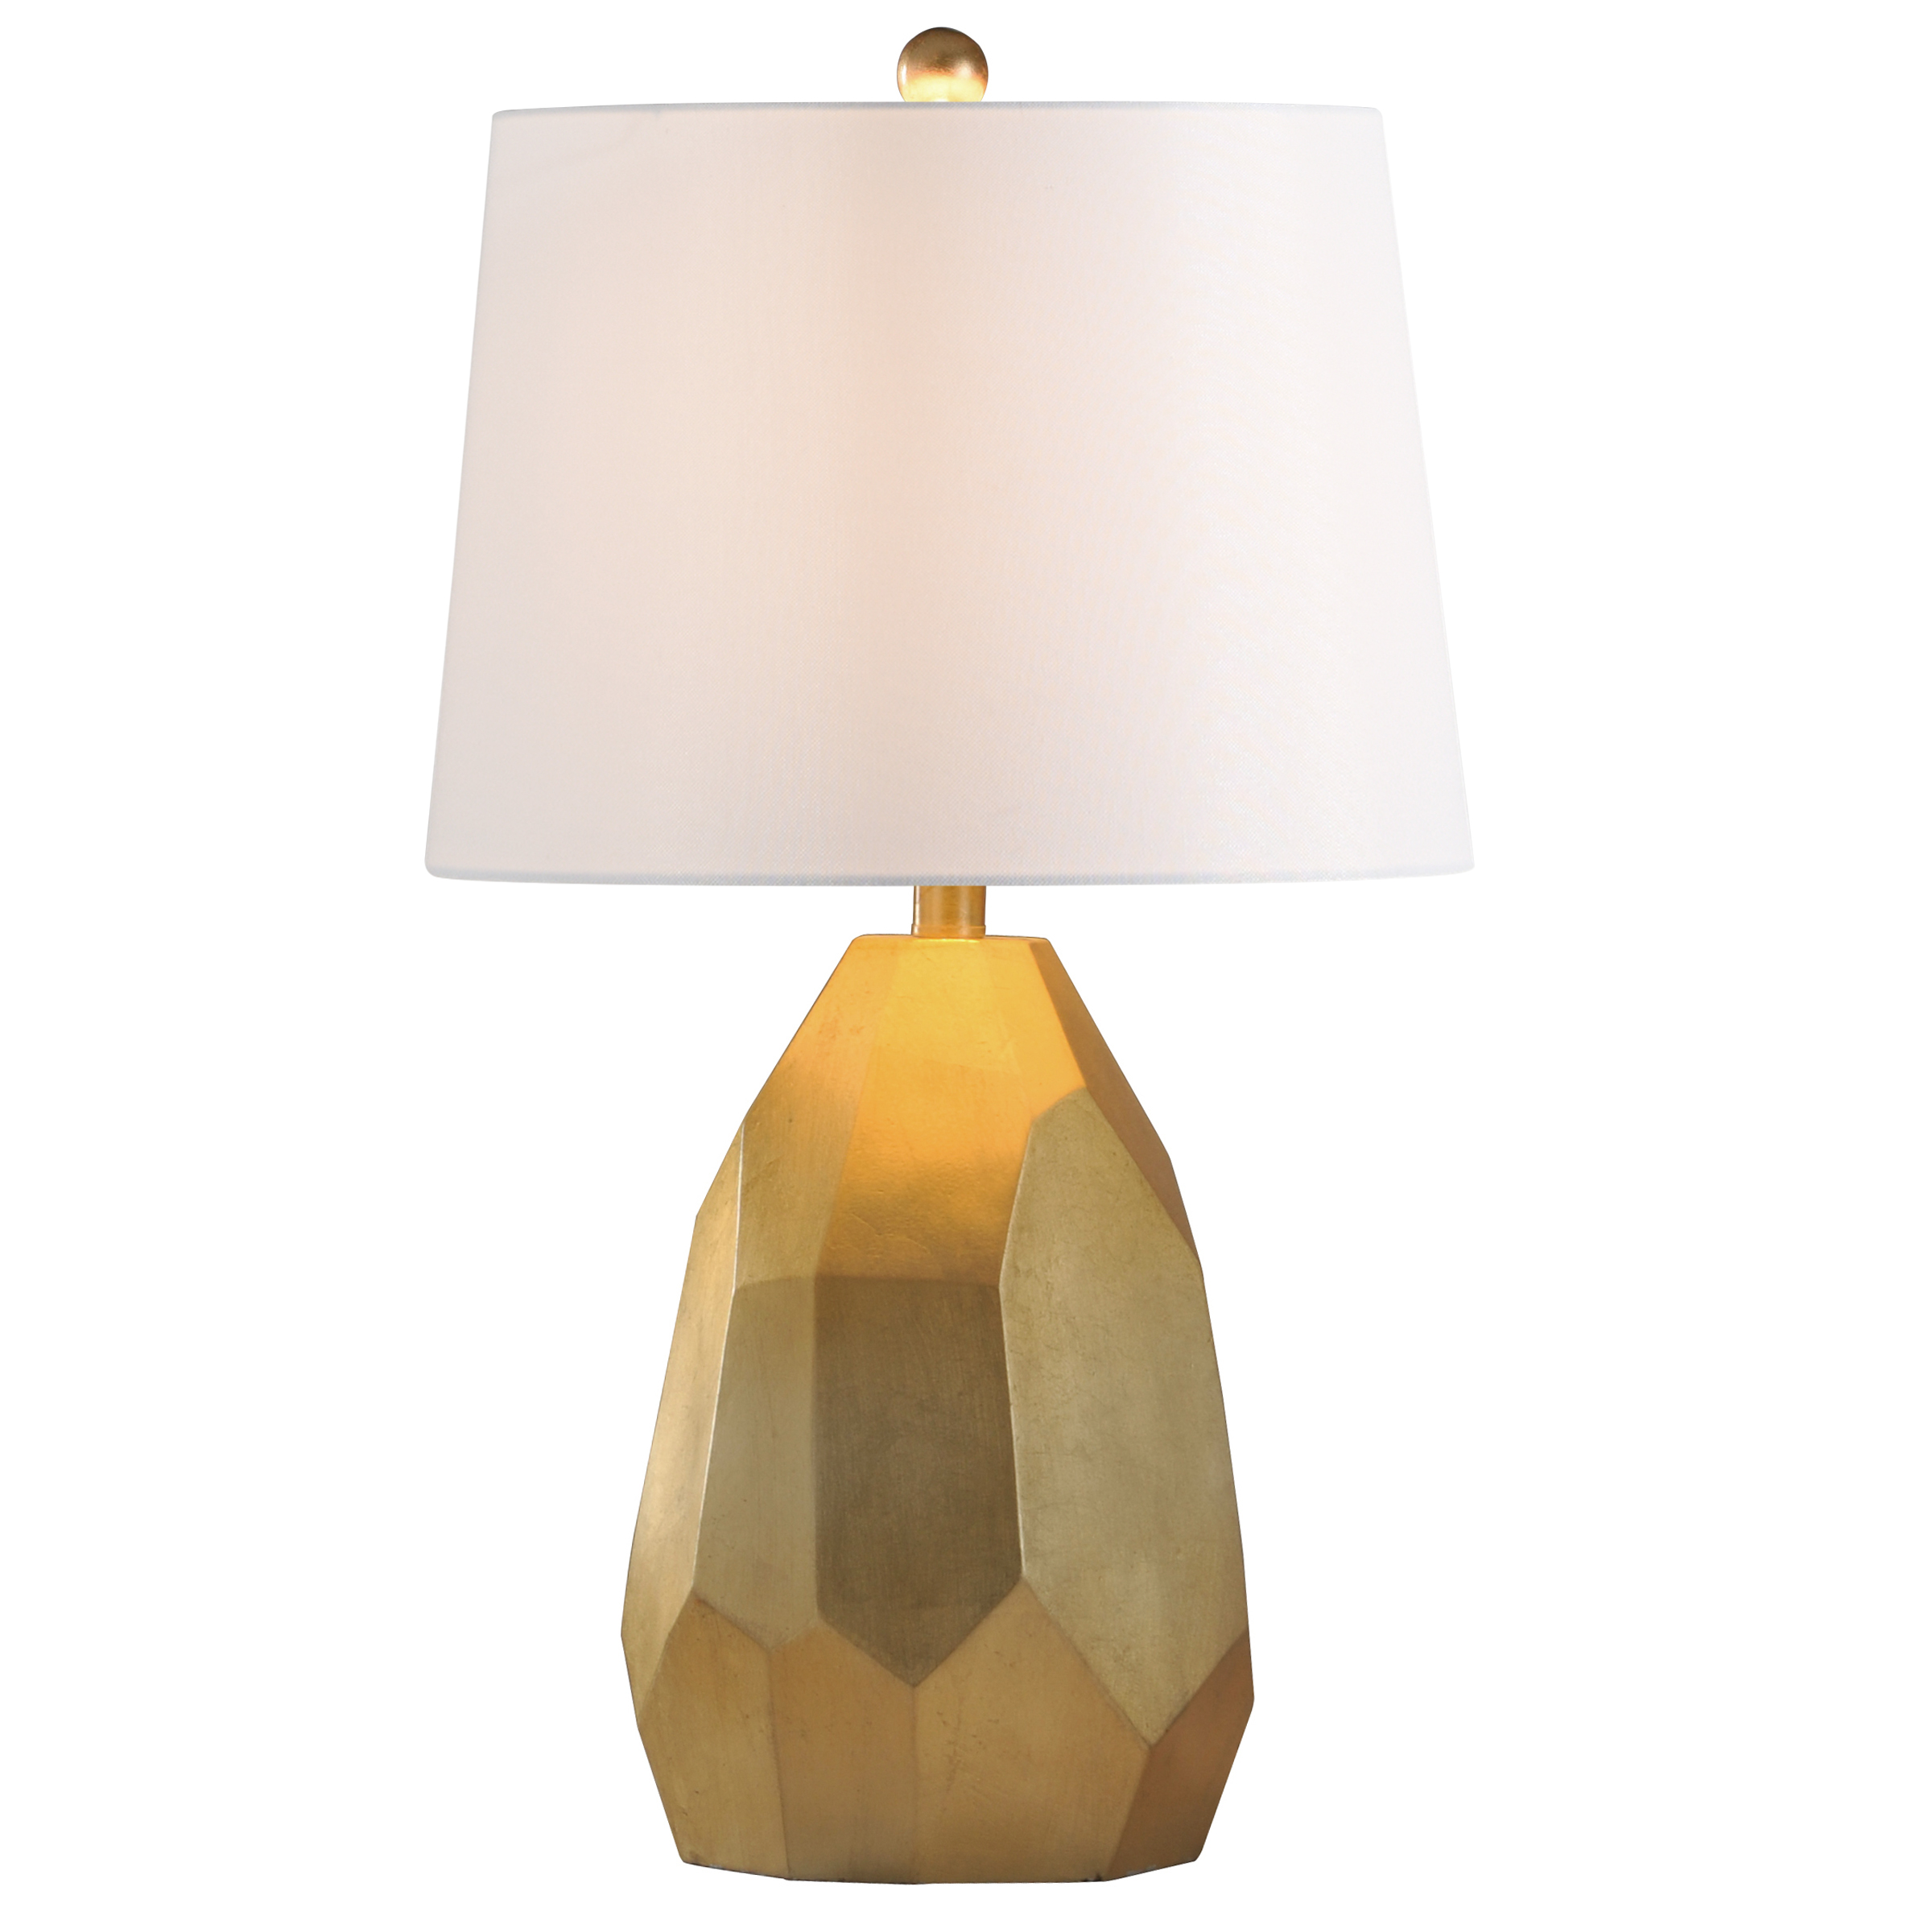 Painted Gold Table Lamp - Gold, Distressed Silver, Faux Cracks - Geneva ...